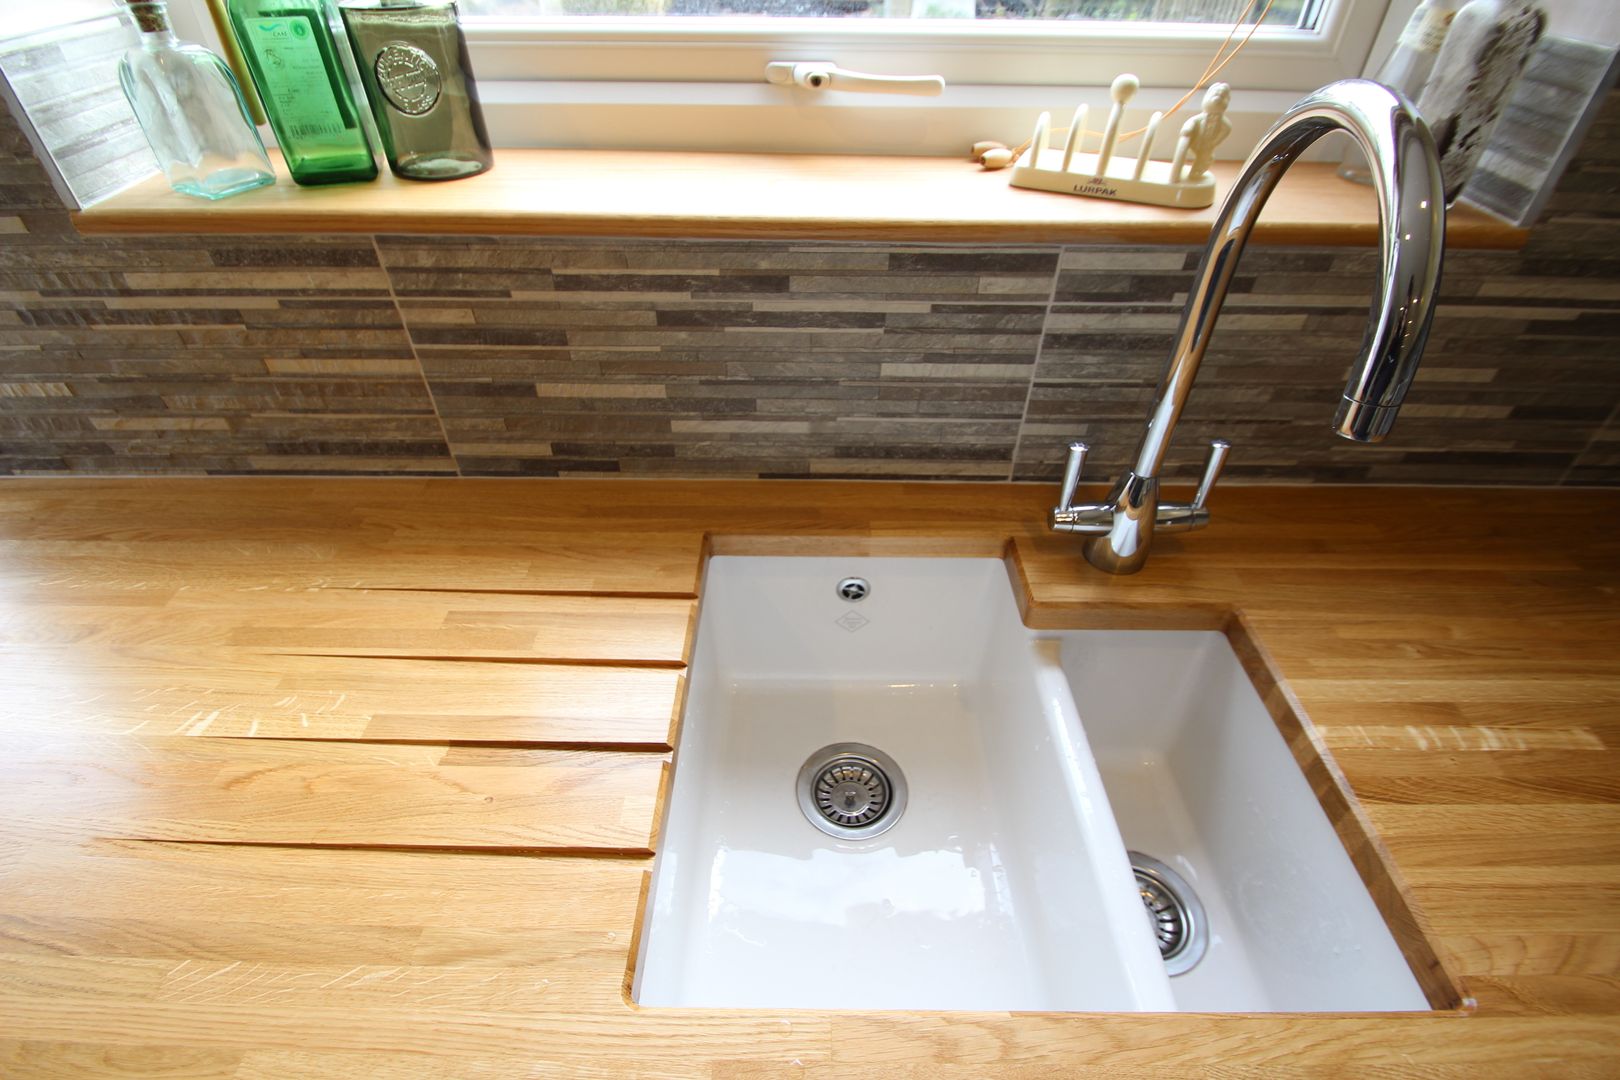 Sink with drain grooves on the worktop AD3 Design Limited Dapur Klasik Sinks & taps